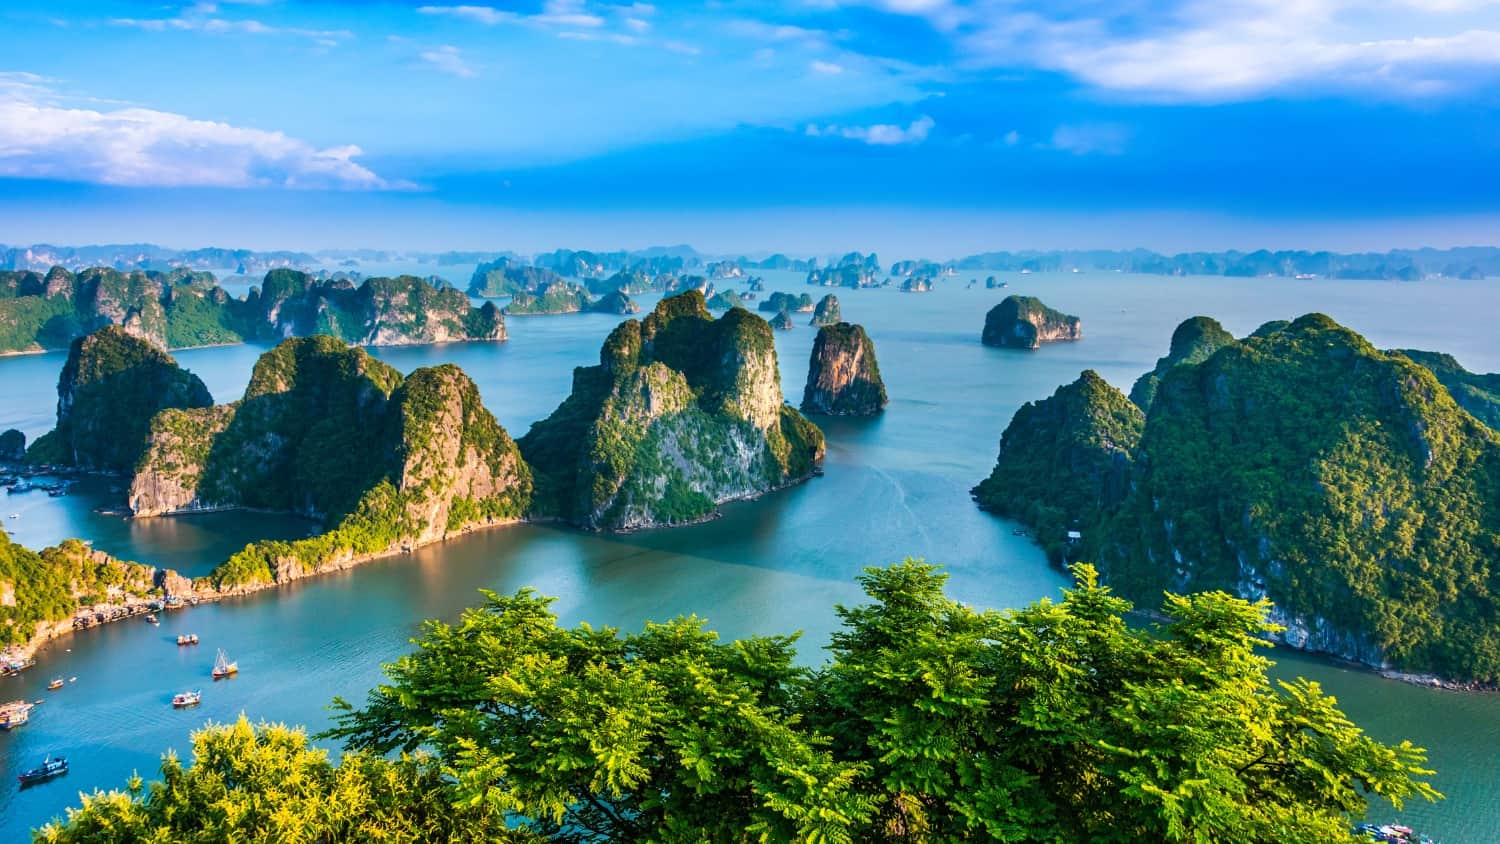 From breathtaking sceneries to unique experiences, embark on an unforgettable journey through Halong Vietnamese with talented tour guides and stunning scenery